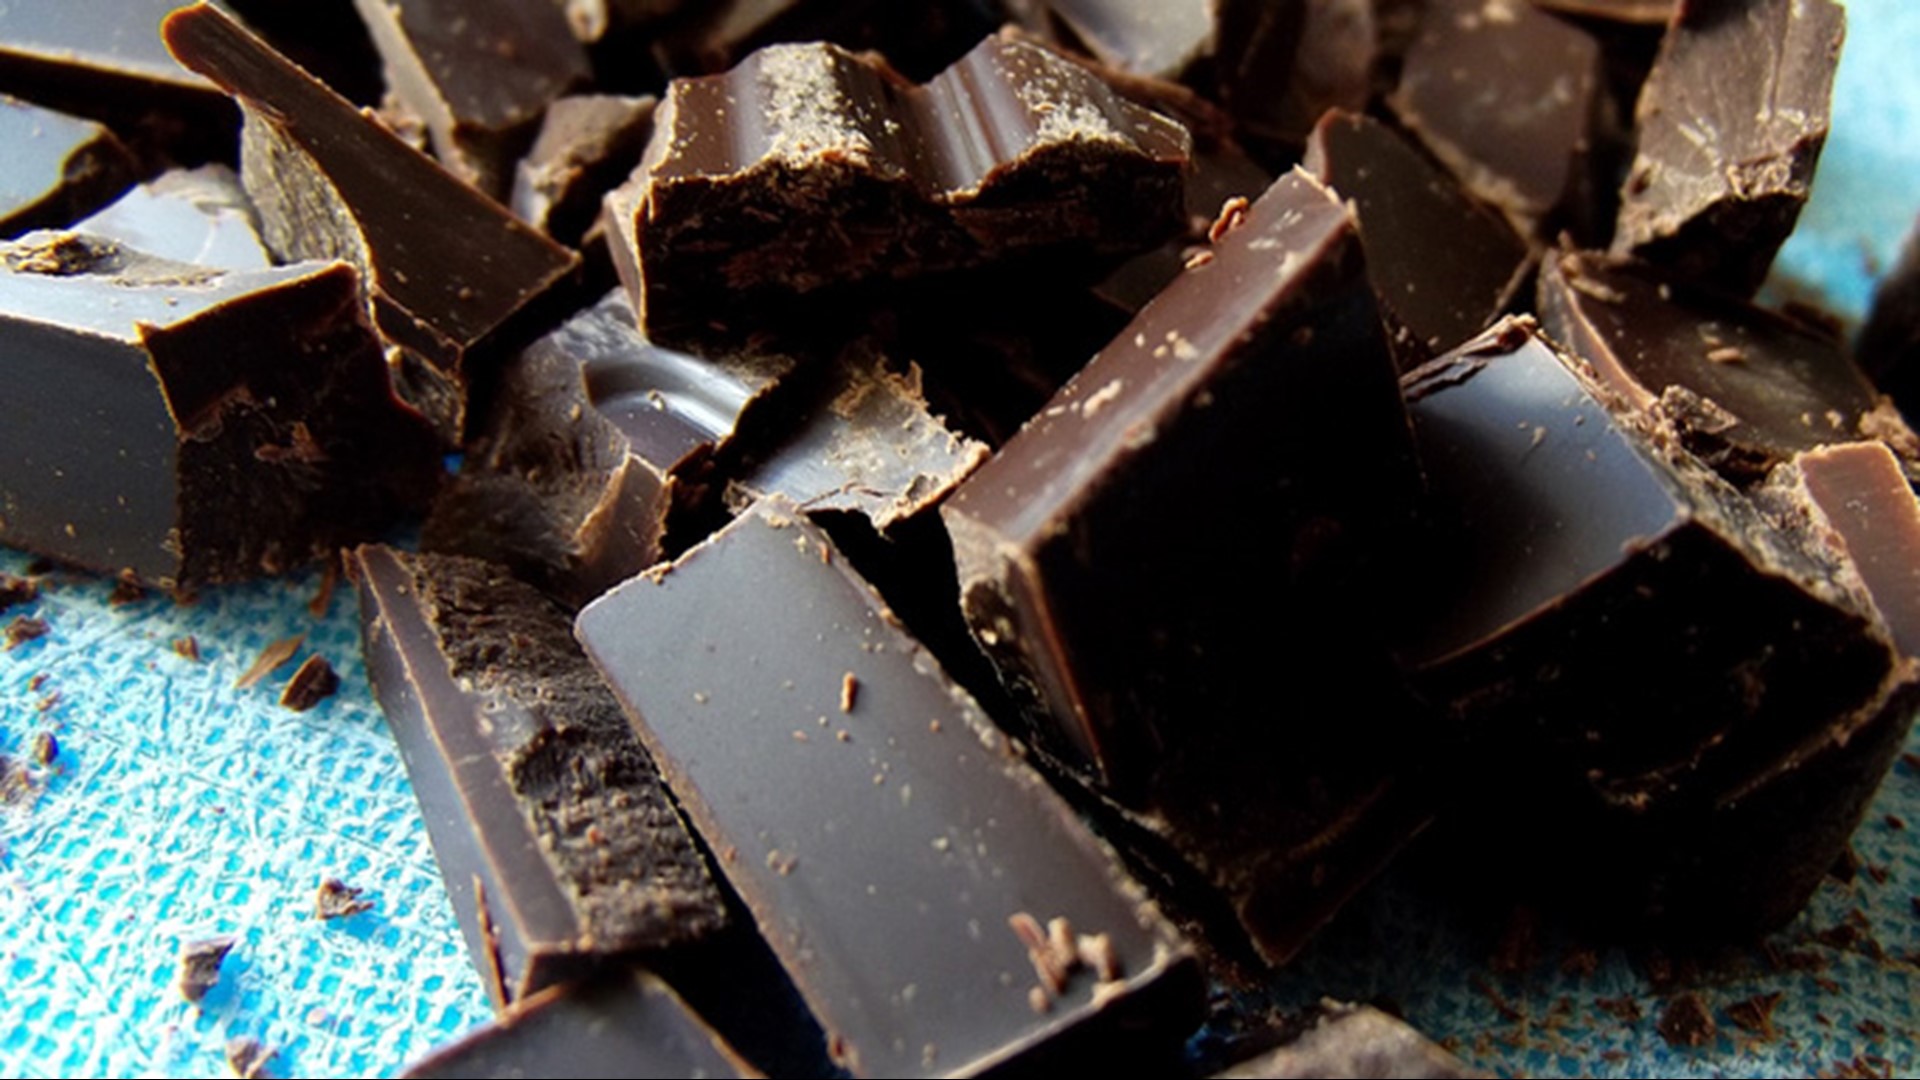 A new report suggests popular dark chocolate bars may contain high levels of cadmium and lead —heavy metals linked to health problems.